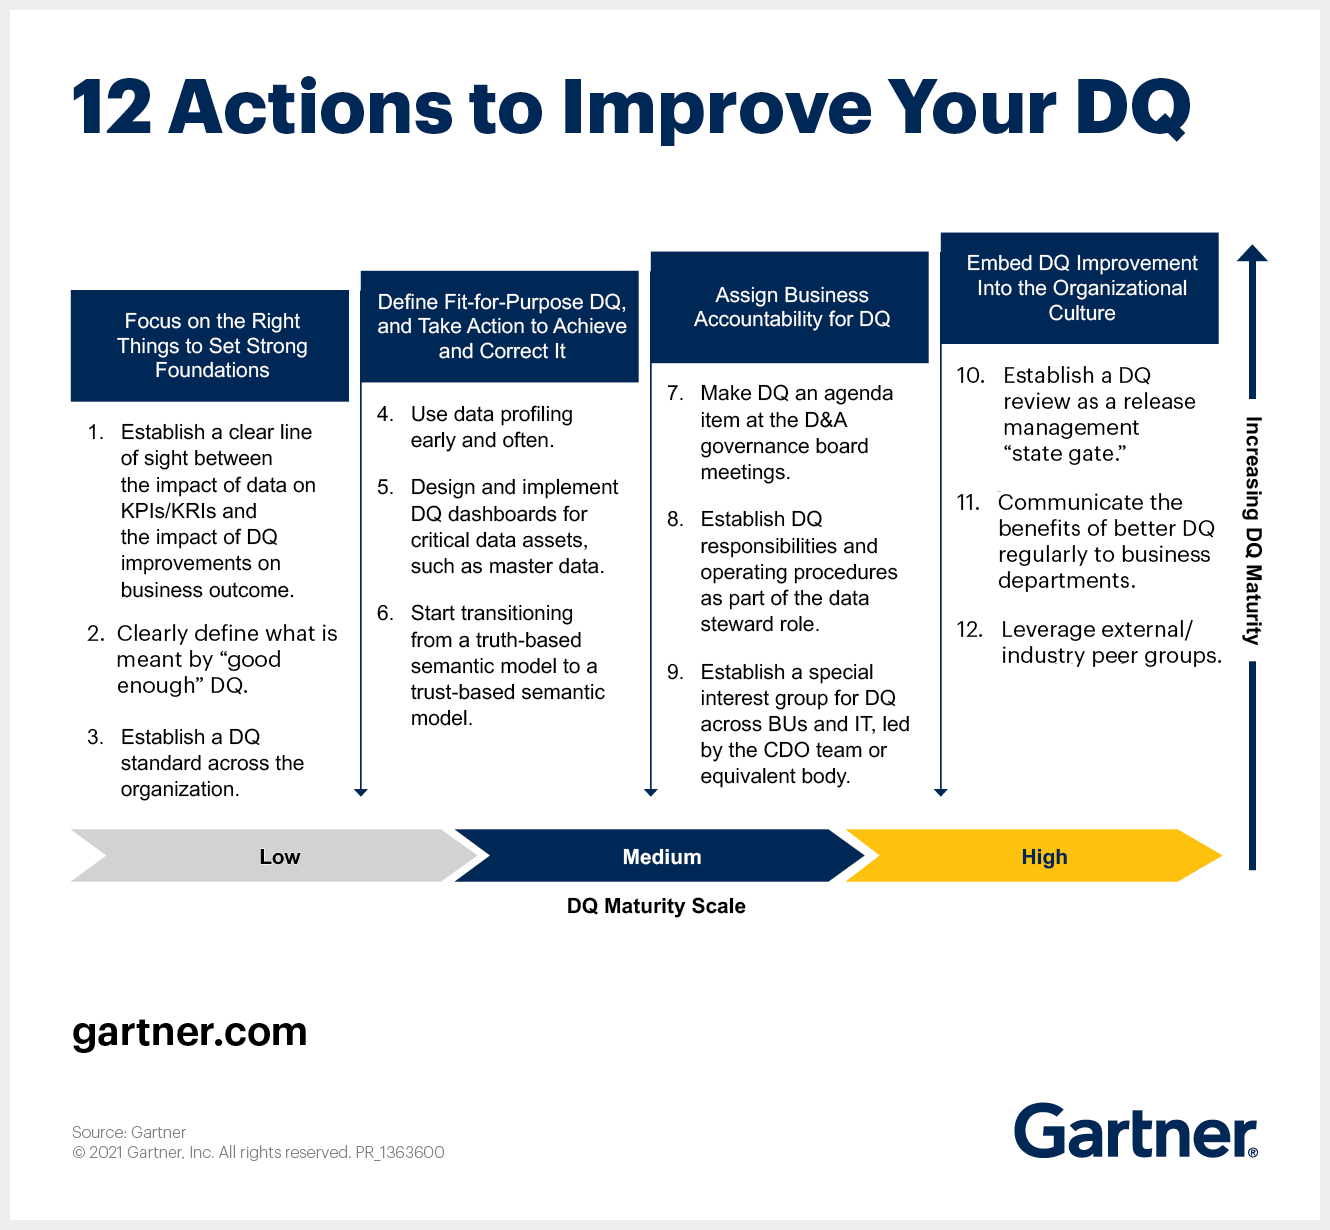 The image is a list of 12 actions Data and Analytics leaders can take to improve data quality in their organizaiton.